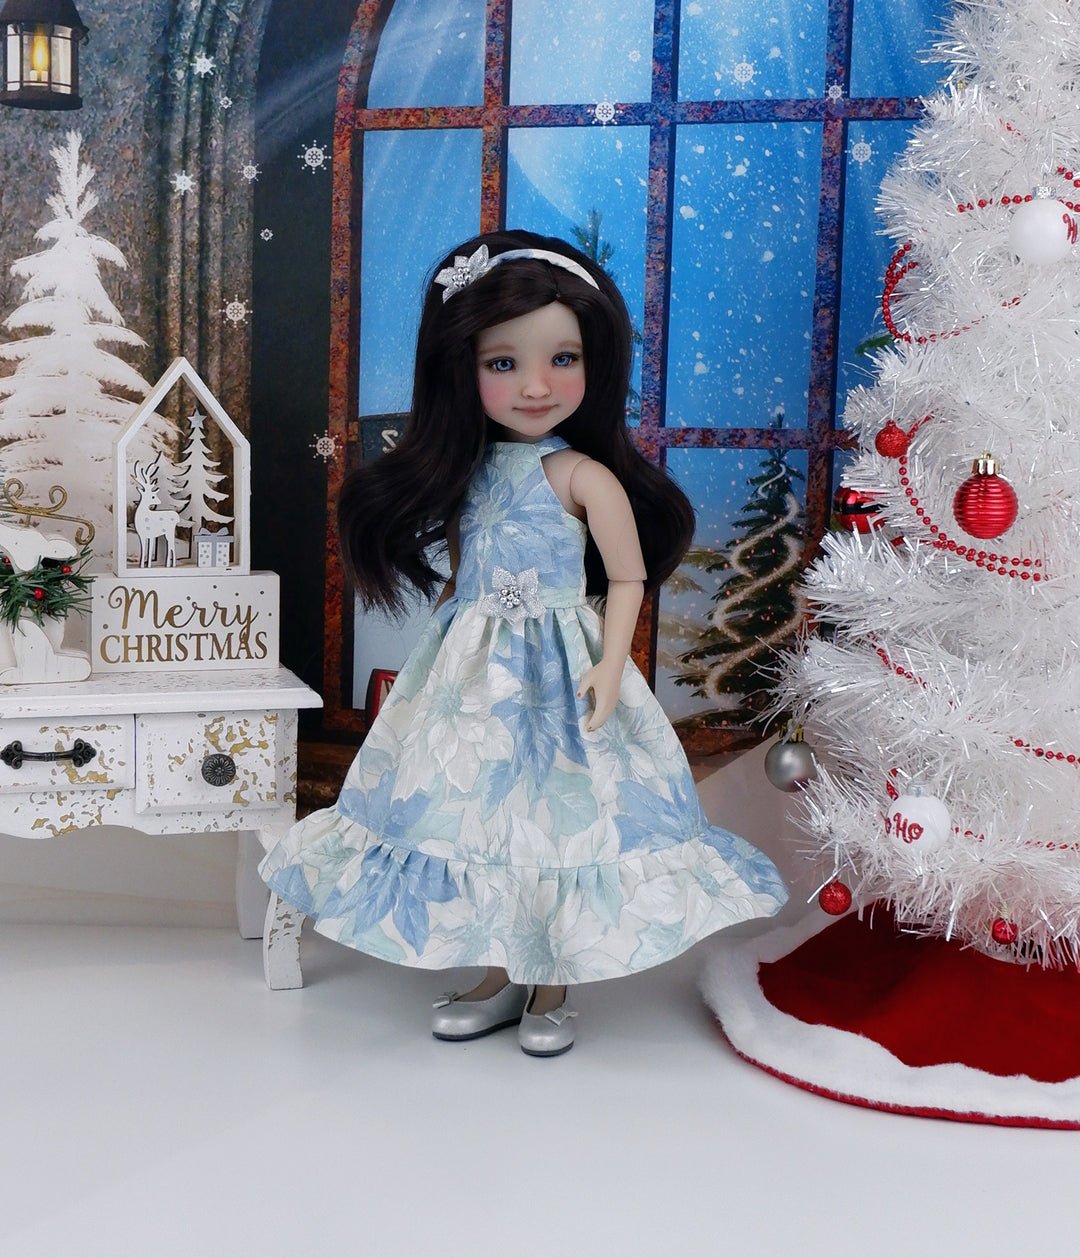 Poinsettia Perfection - dress with shoes for Ruby Red Fashion Friends doll